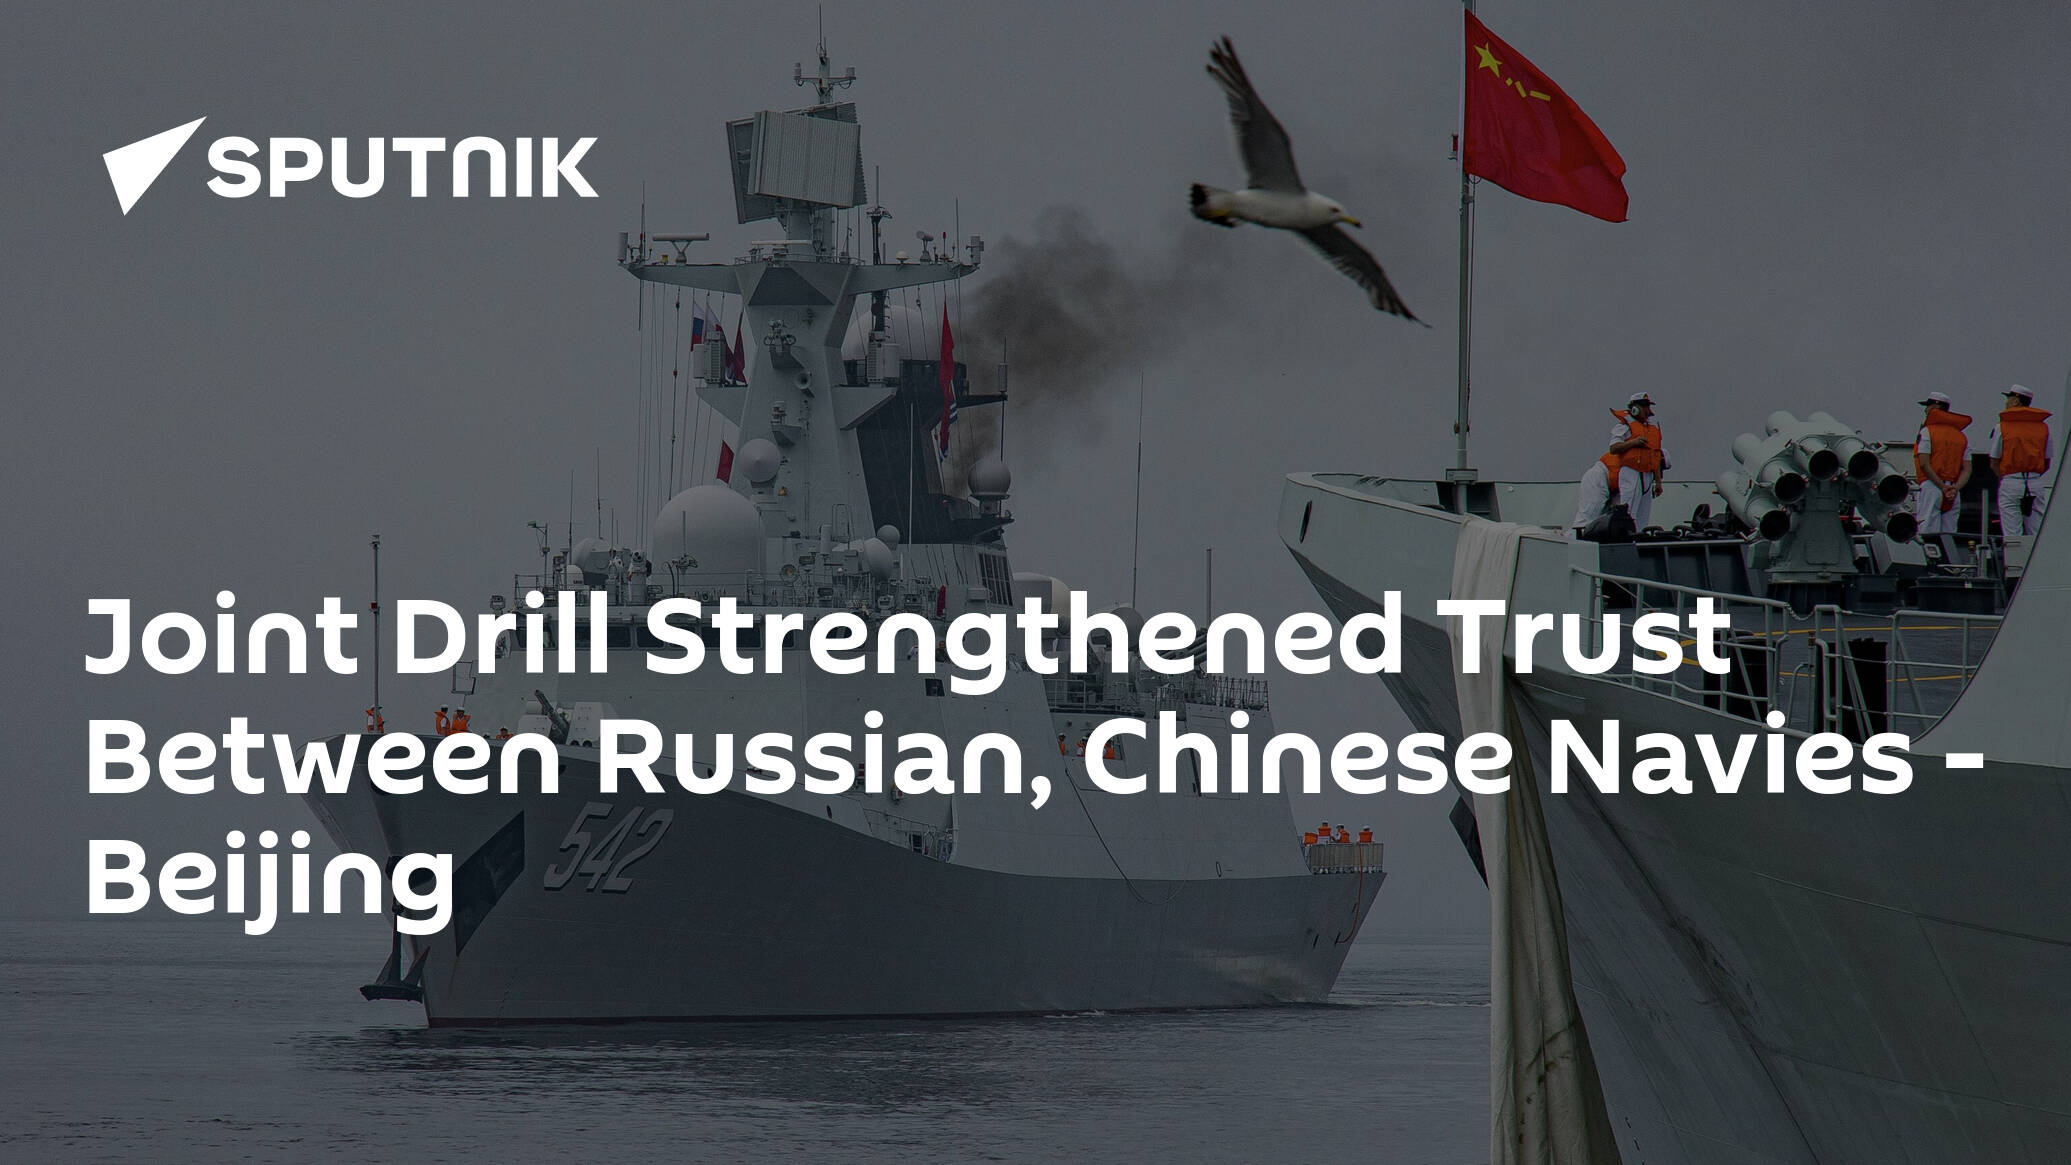 Joint Drill Strengthened Trust Between Russian, Chinese Navies - Beijing